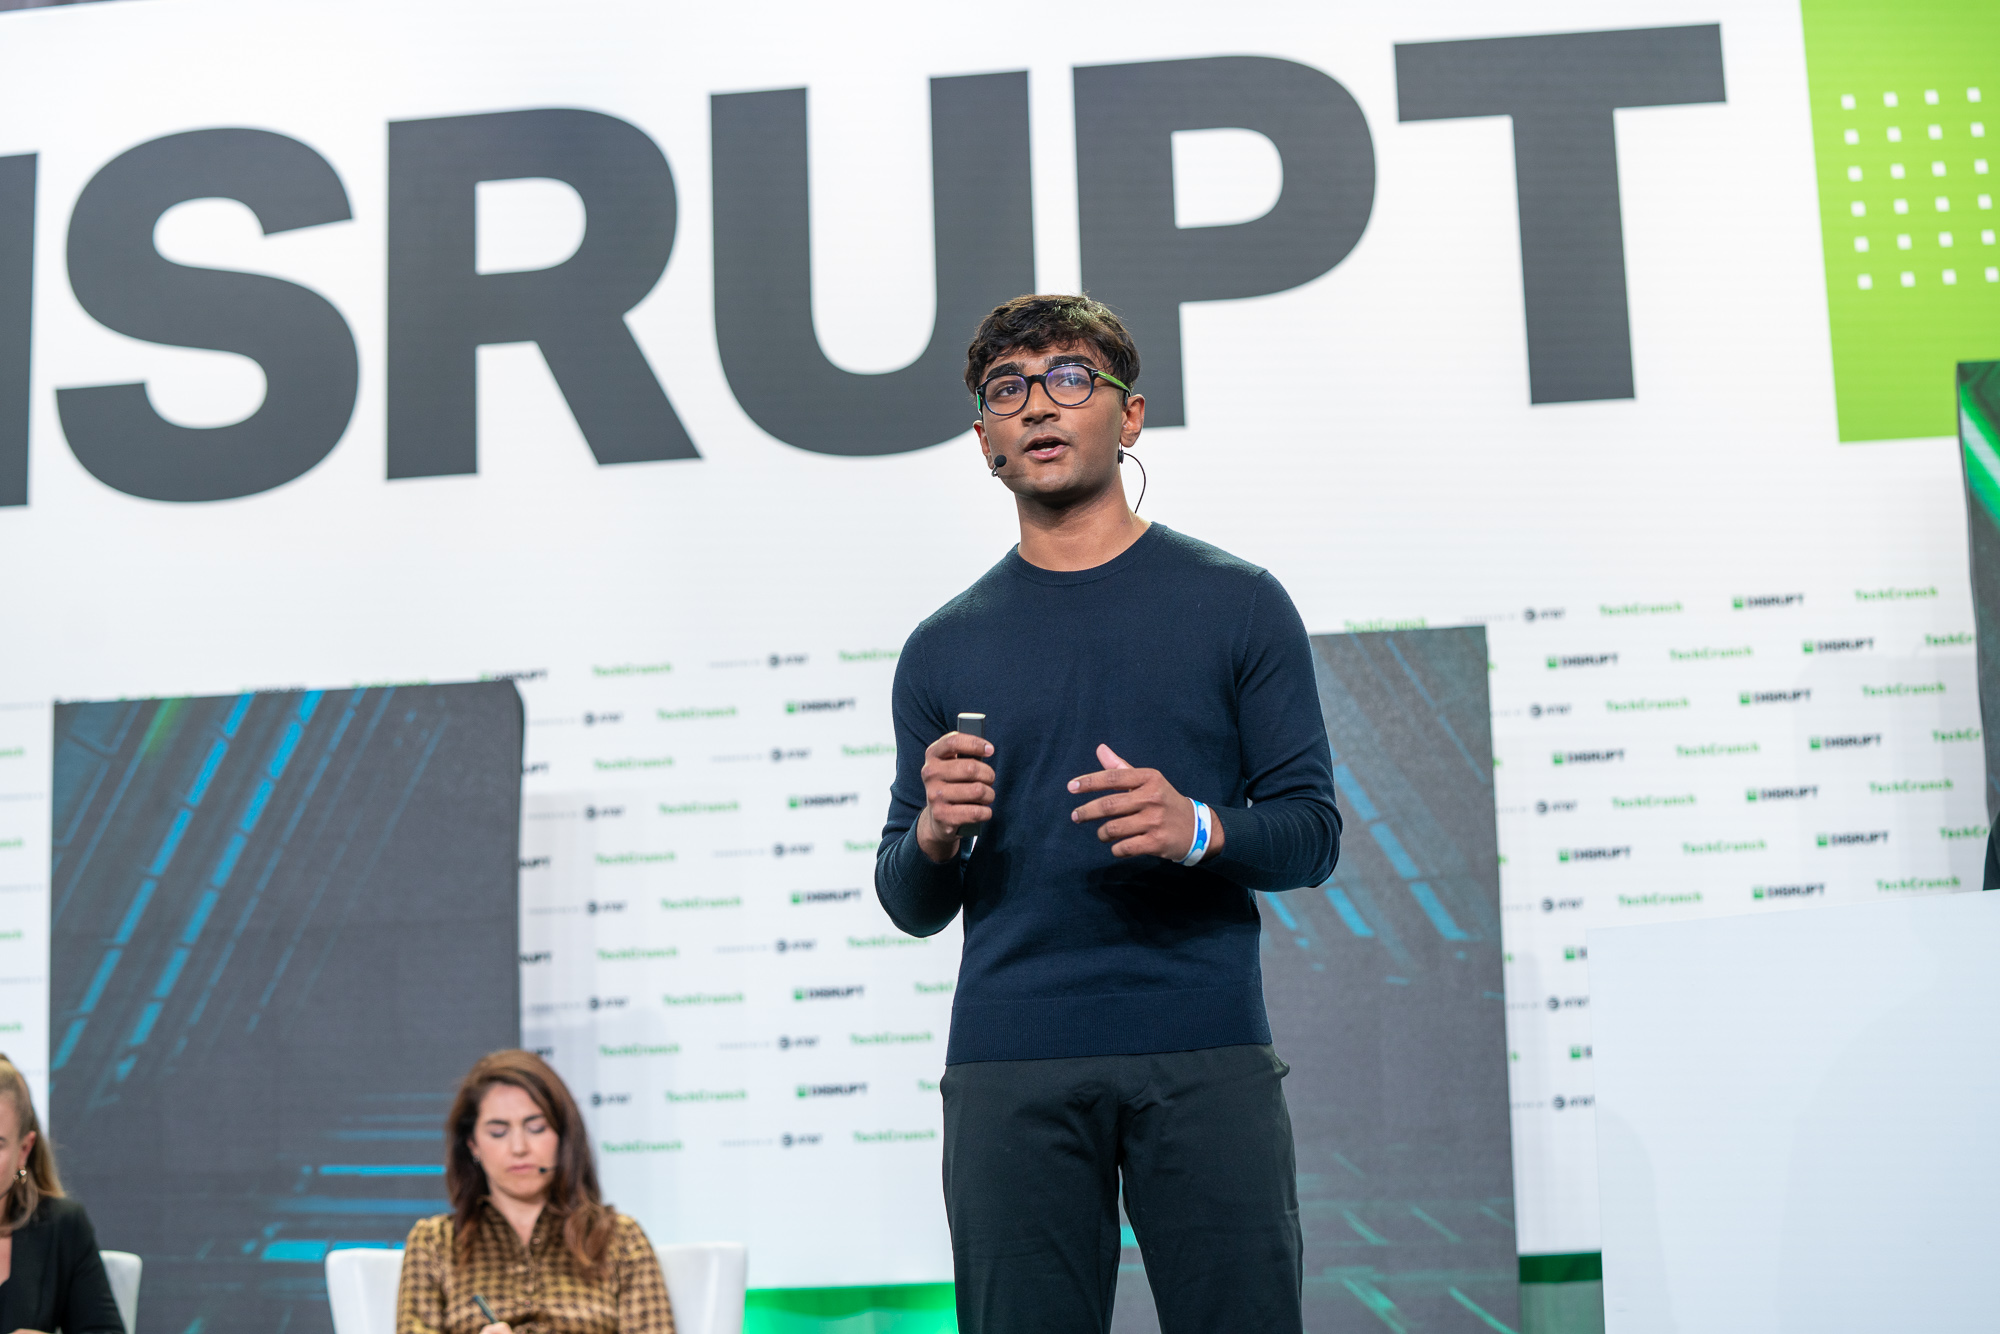 DigestAI’s 19-year-old founder wants to make education addictive